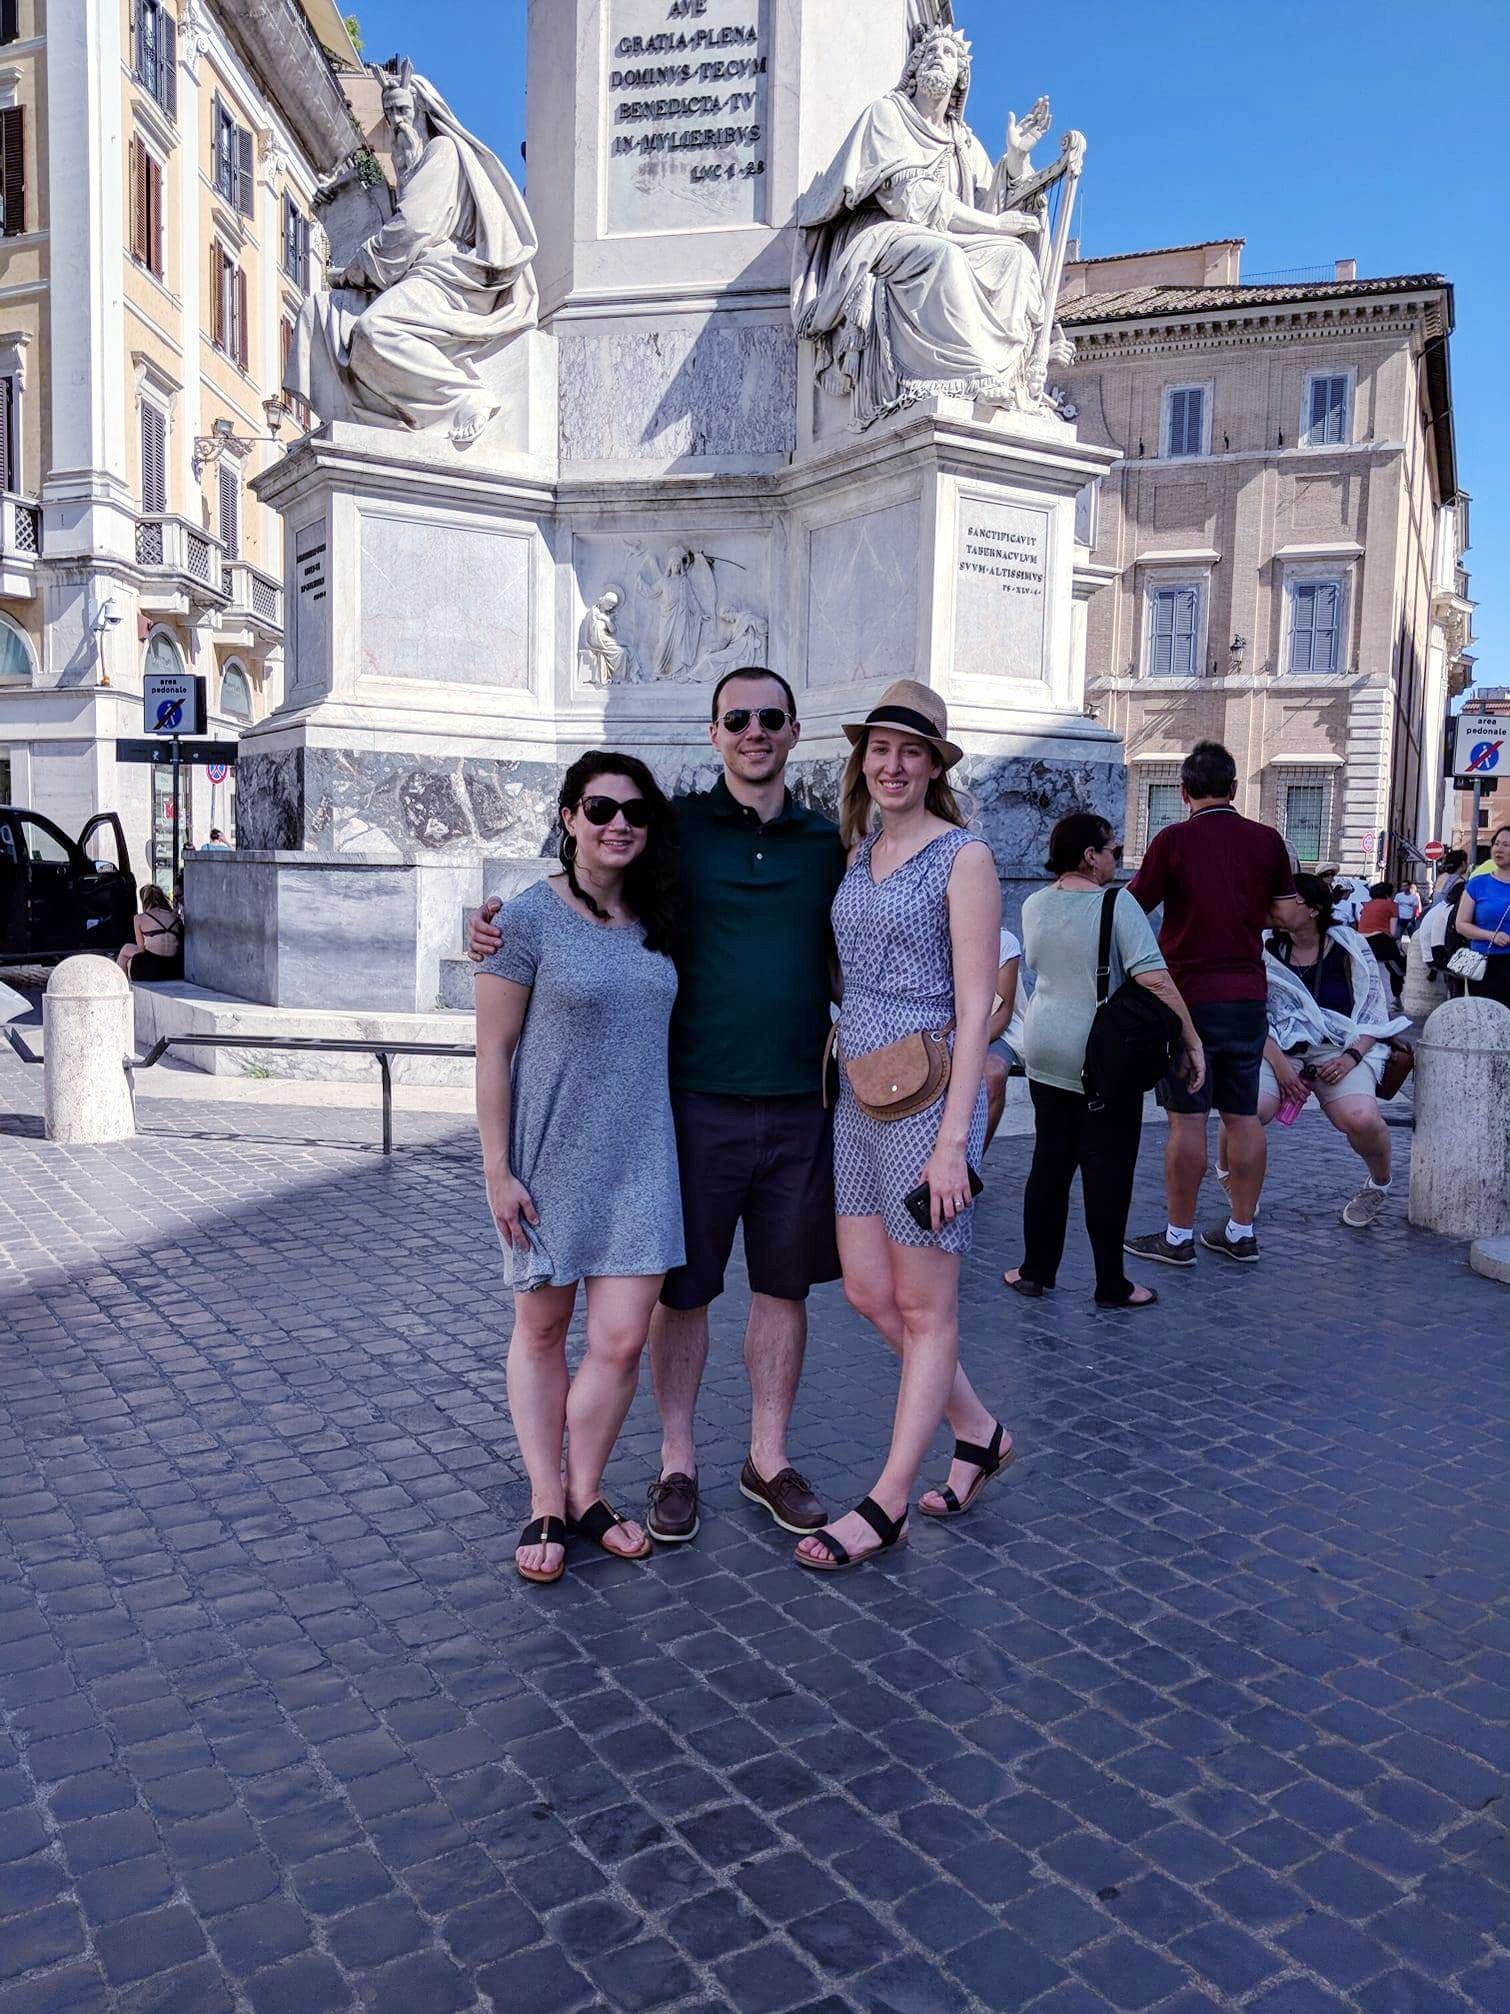 Two females and one male posing for a picture in a cobblestone piazza in Rome, Italy. In the background, a white marble obelisk with two statues of males in traditional Roman attire.